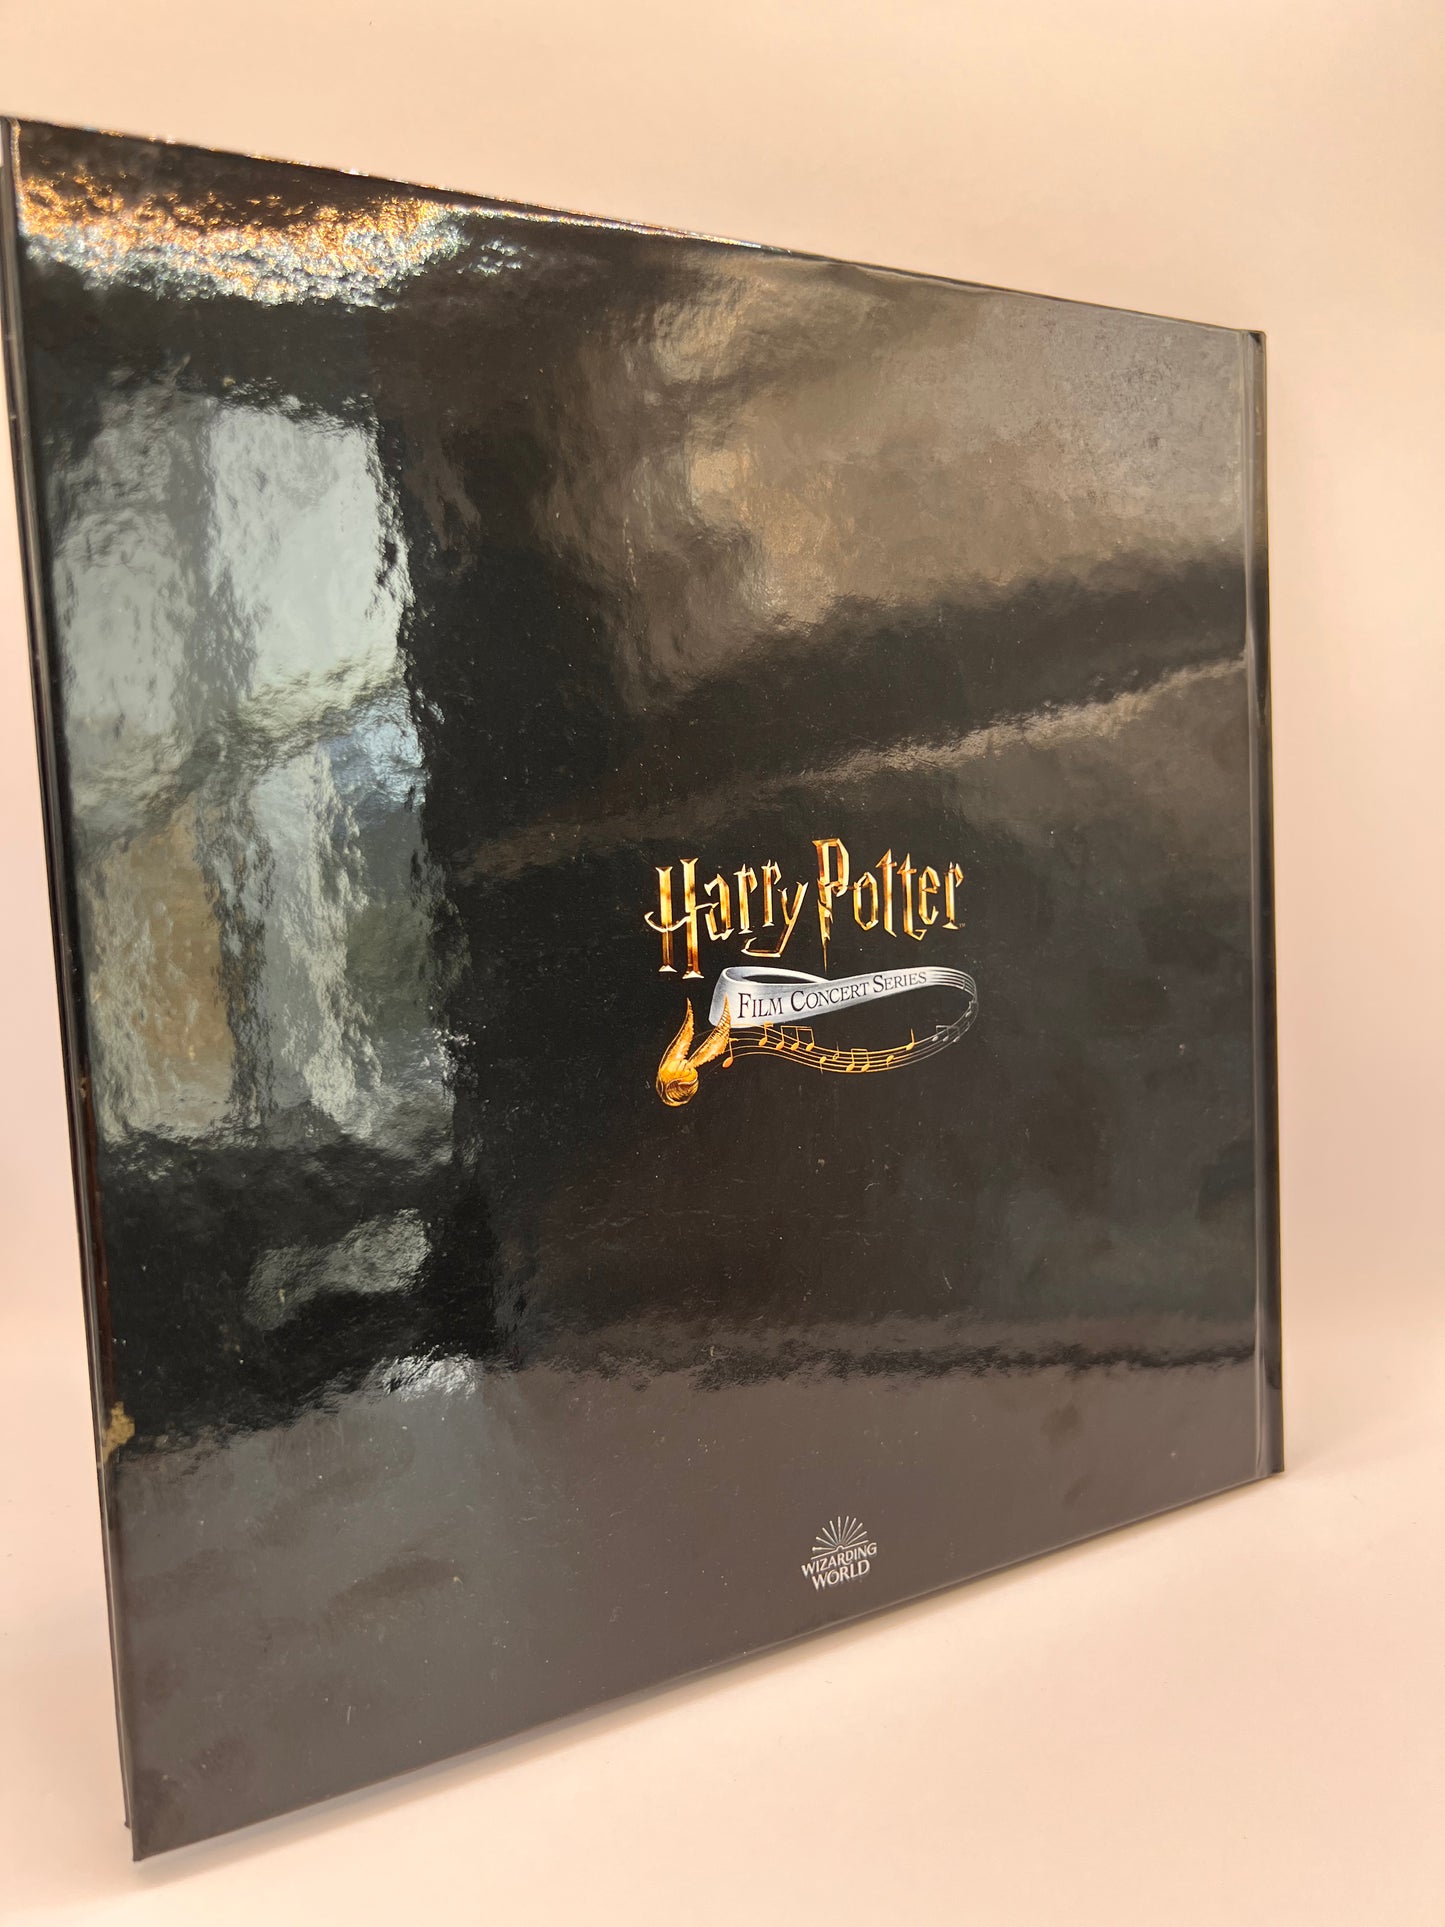 Harry Potter and the Deathly Hallows™ - Part 1 in Concert Hardback Program Book